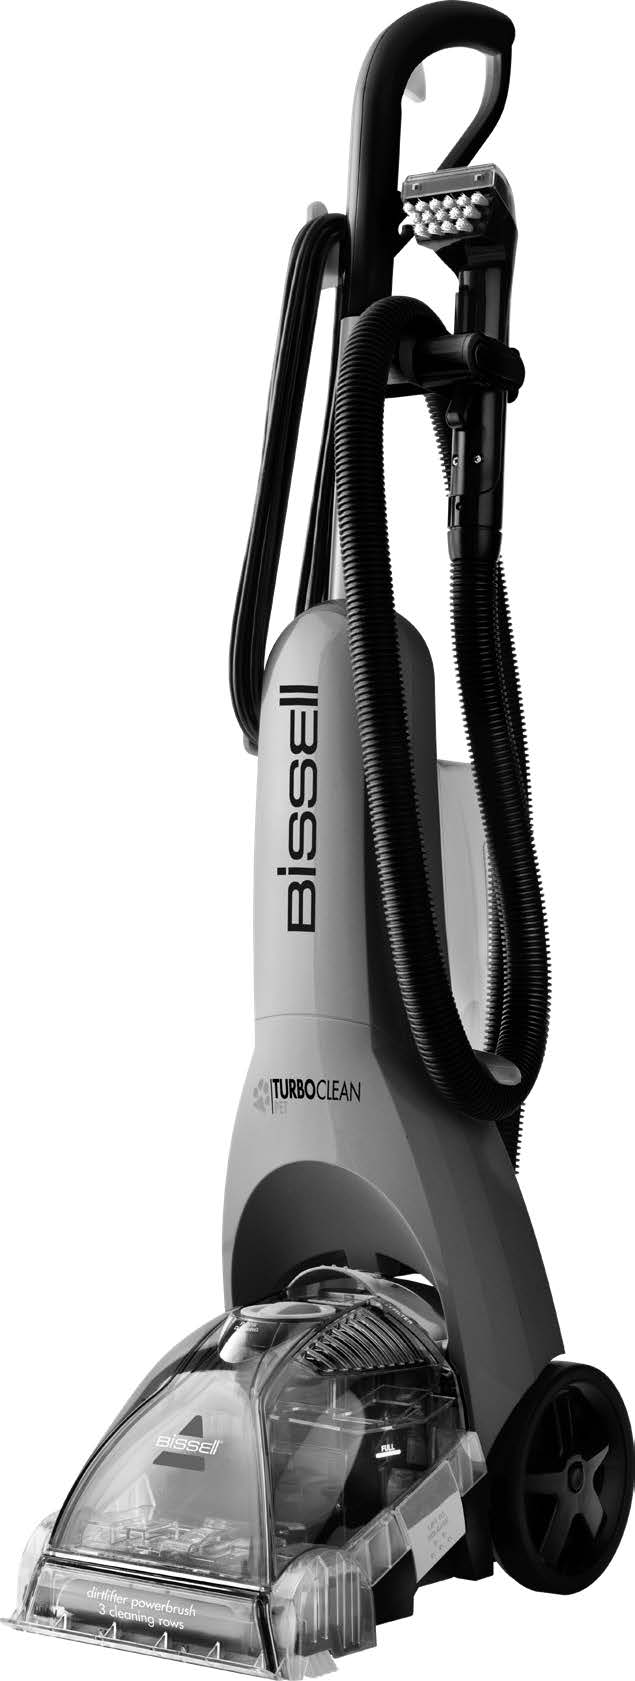 Bissell Turboclean Pet User Guide